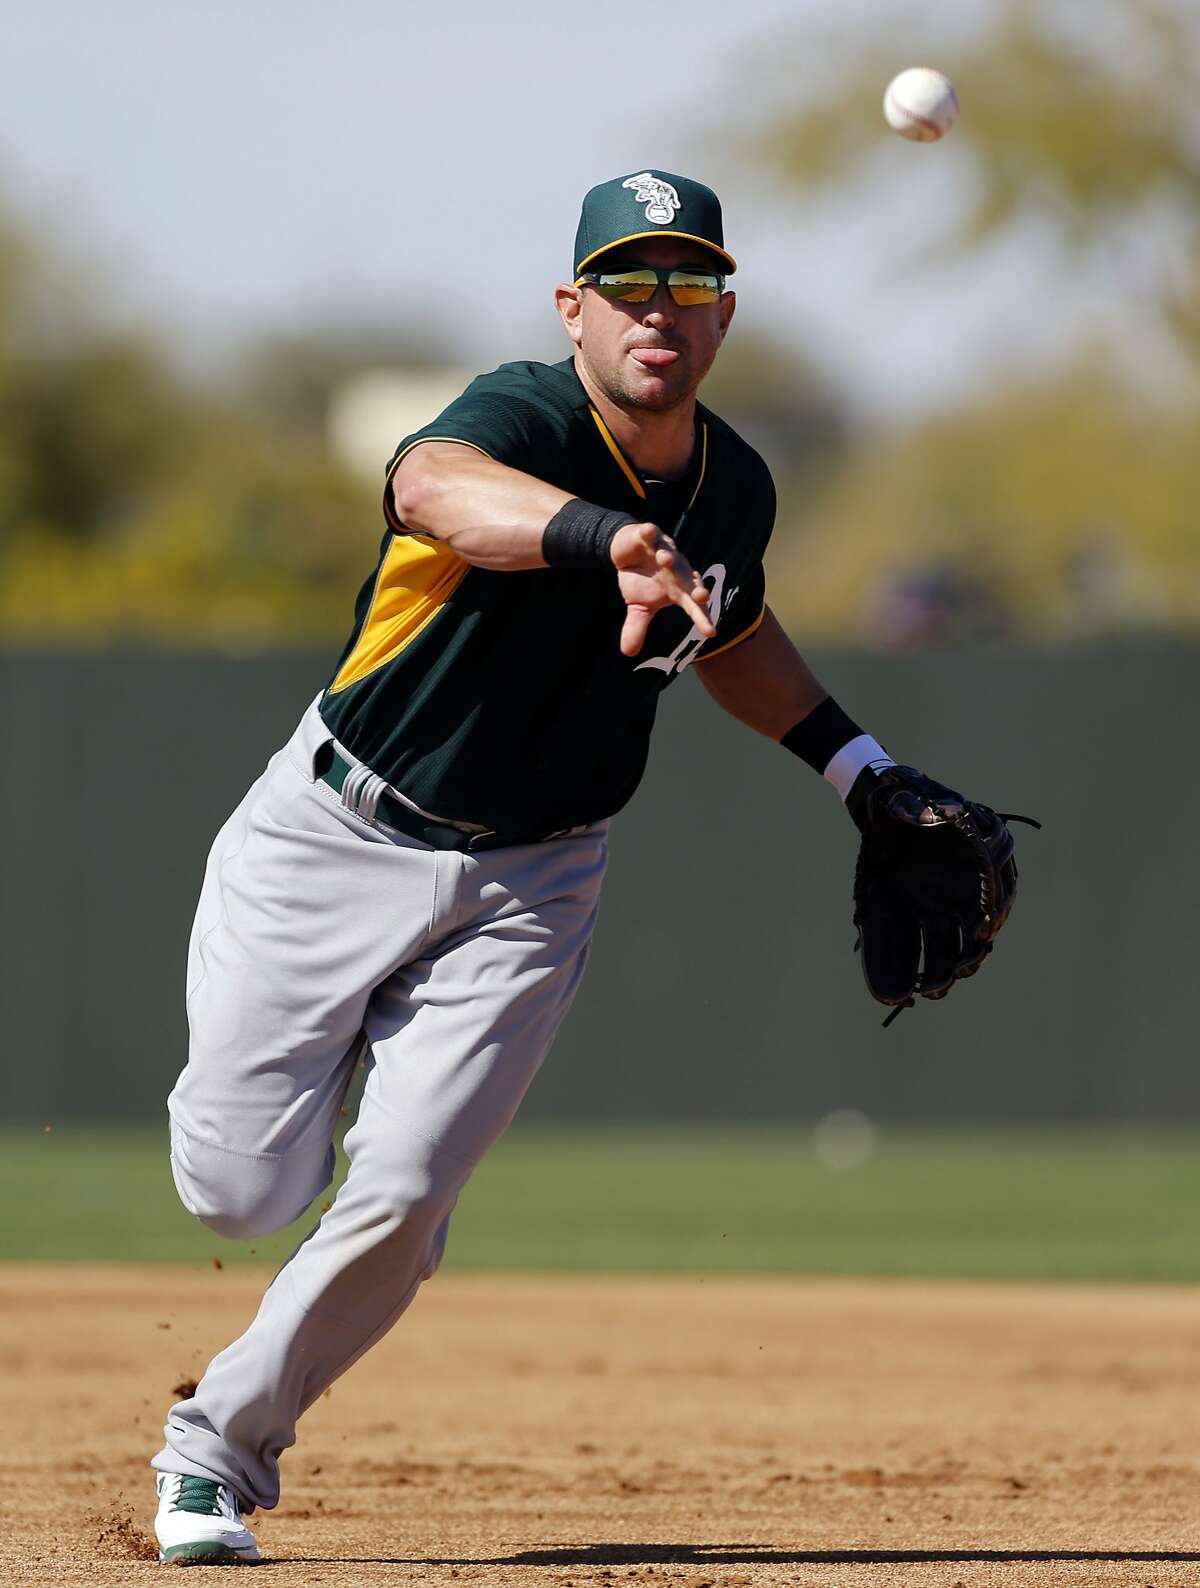 A's infielder Nick Punto, (1) tosses to first base during drills at the Papago Baseball Facility in Phoenix, Arizona on Thursday Feb. 20, 2014. The Oakland Athletics continue their spring training schedule in the Arizona desert in preparation of the 2014 MBL season.